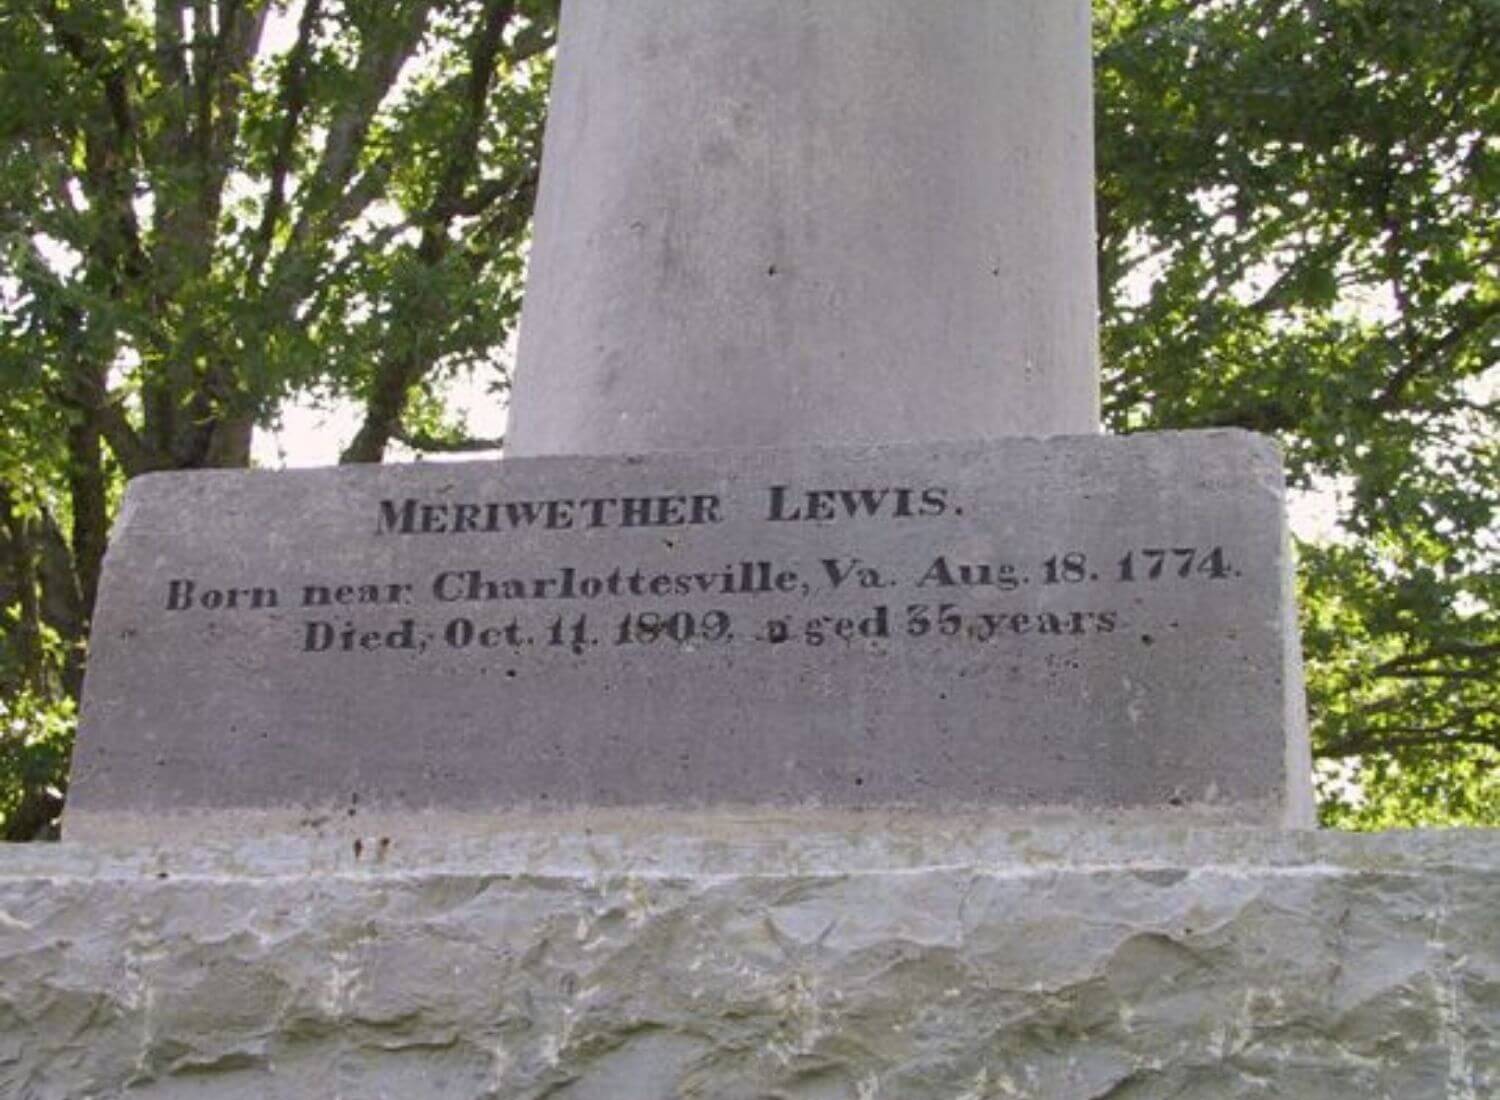 Was The Death Of Meriwether Lewis Natural Or Planned?